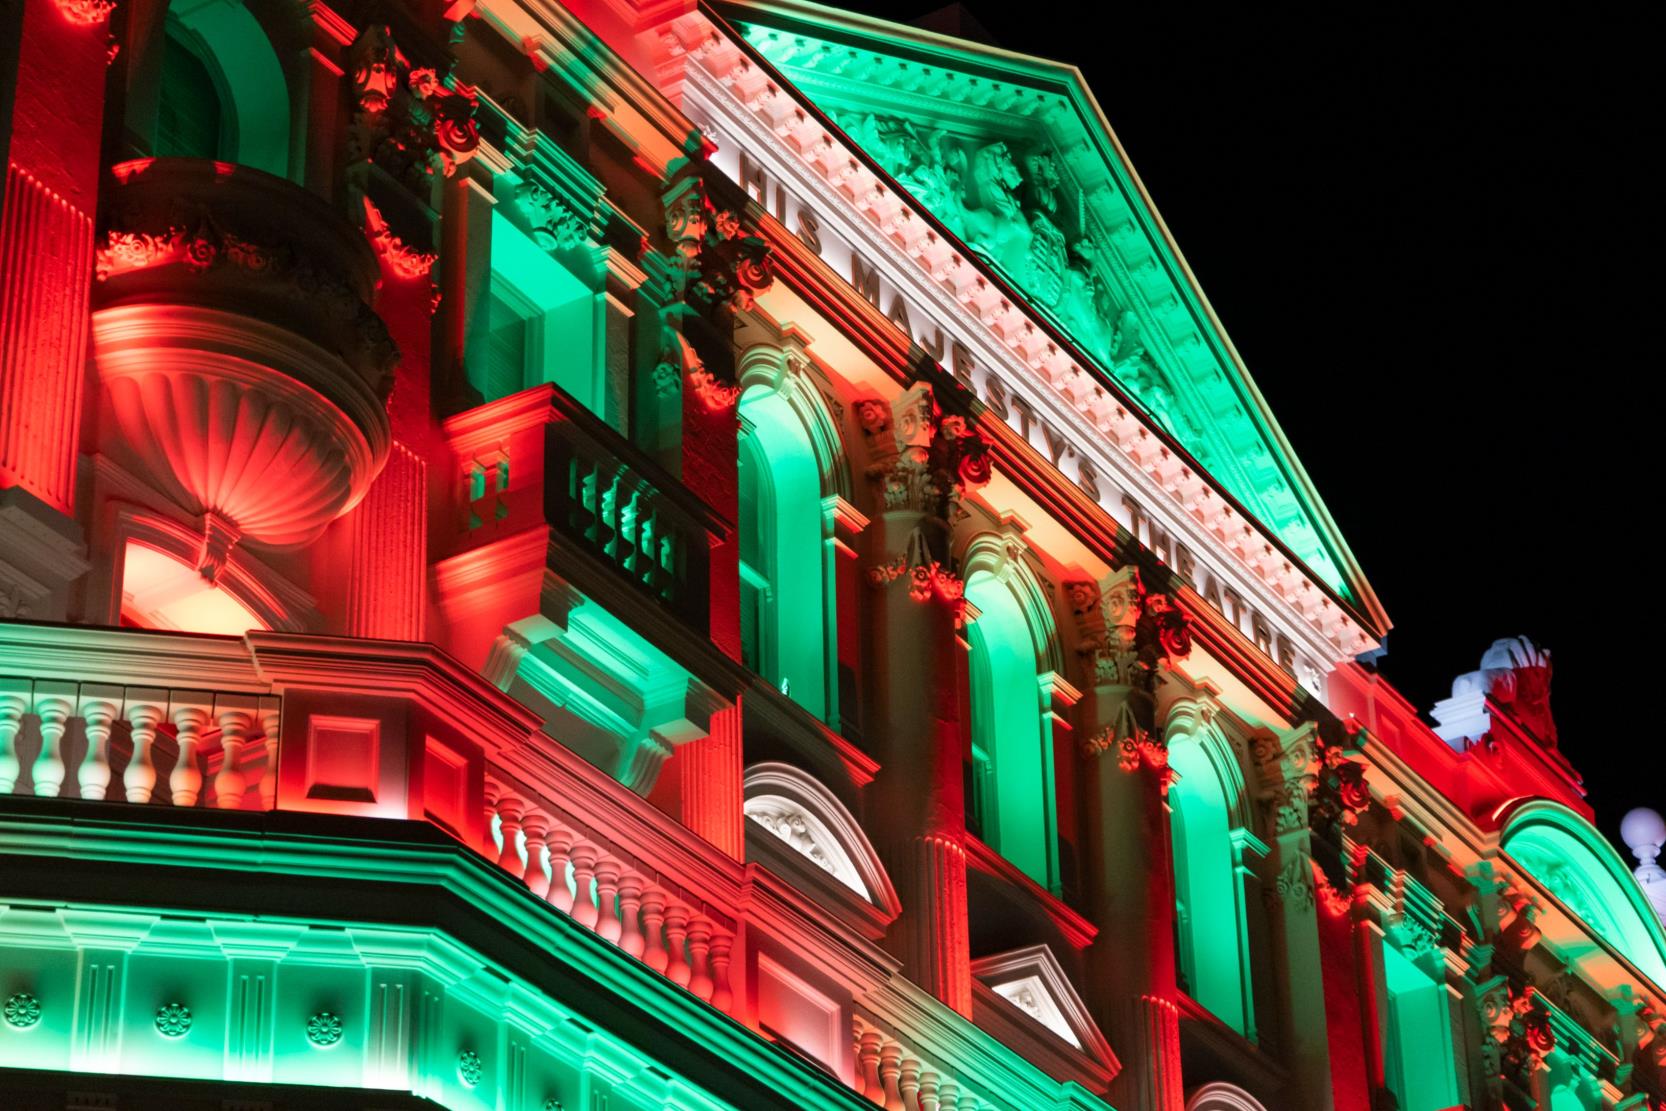 His Majesty's Theatre lit in Christmas colours